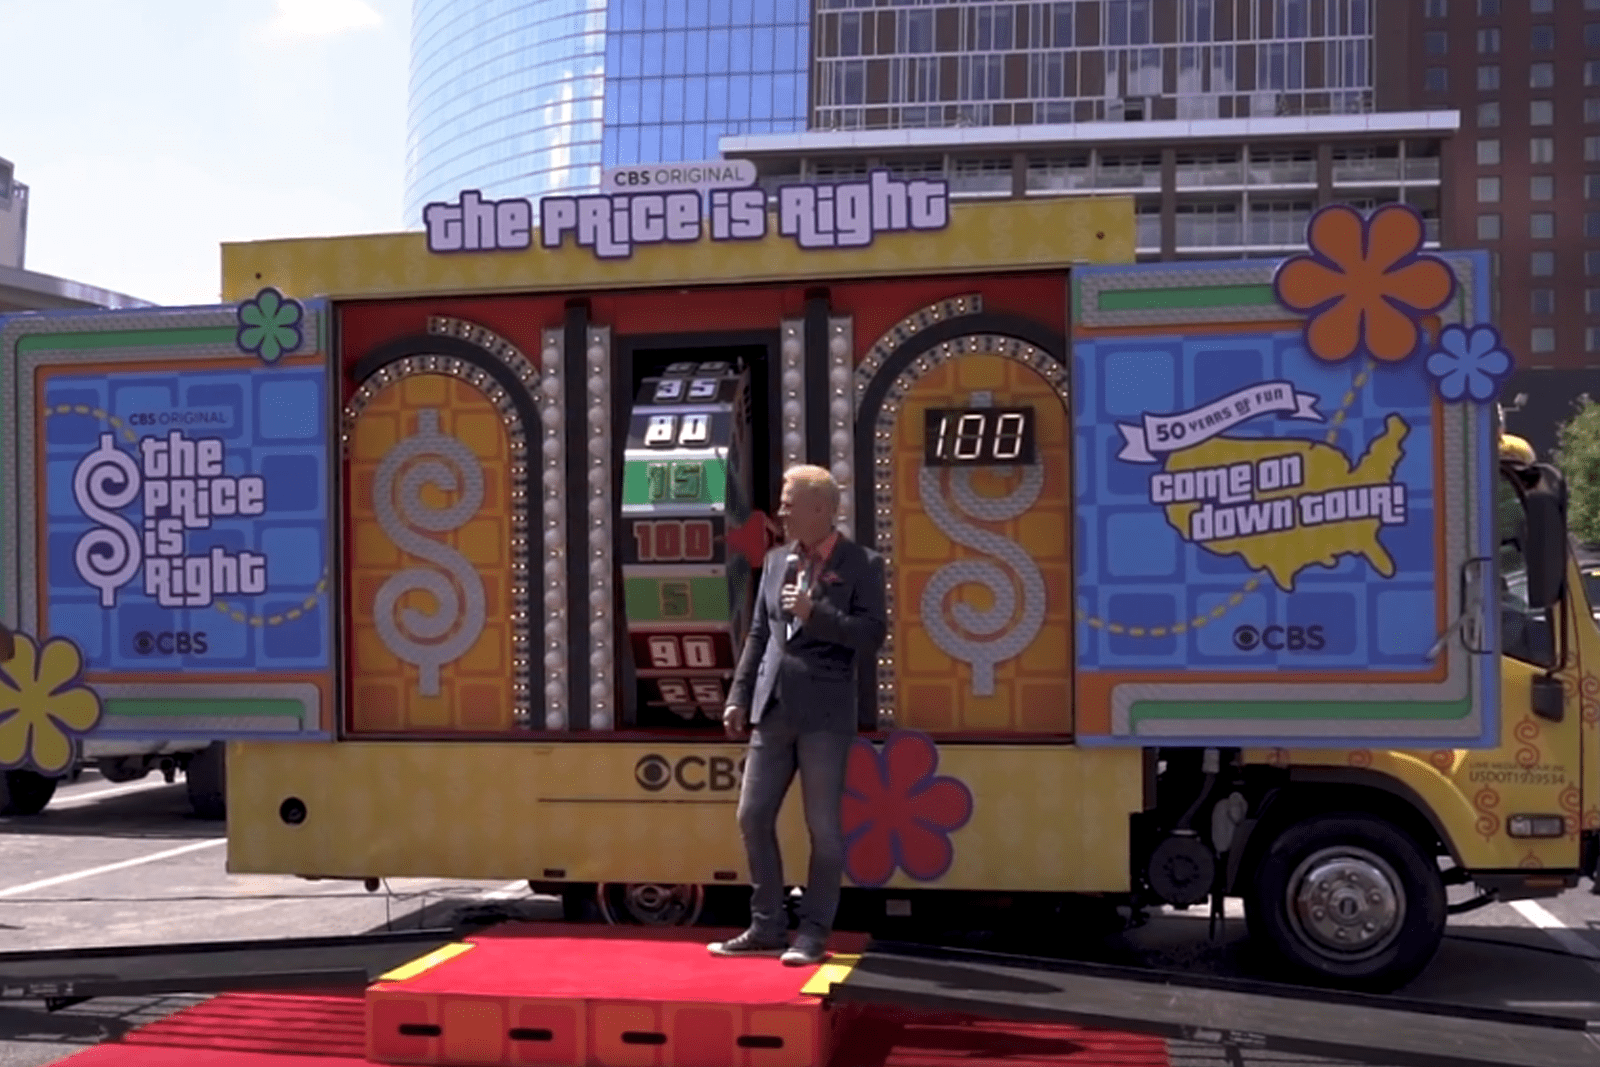 Amramp was there for the Price is Right traveling game show